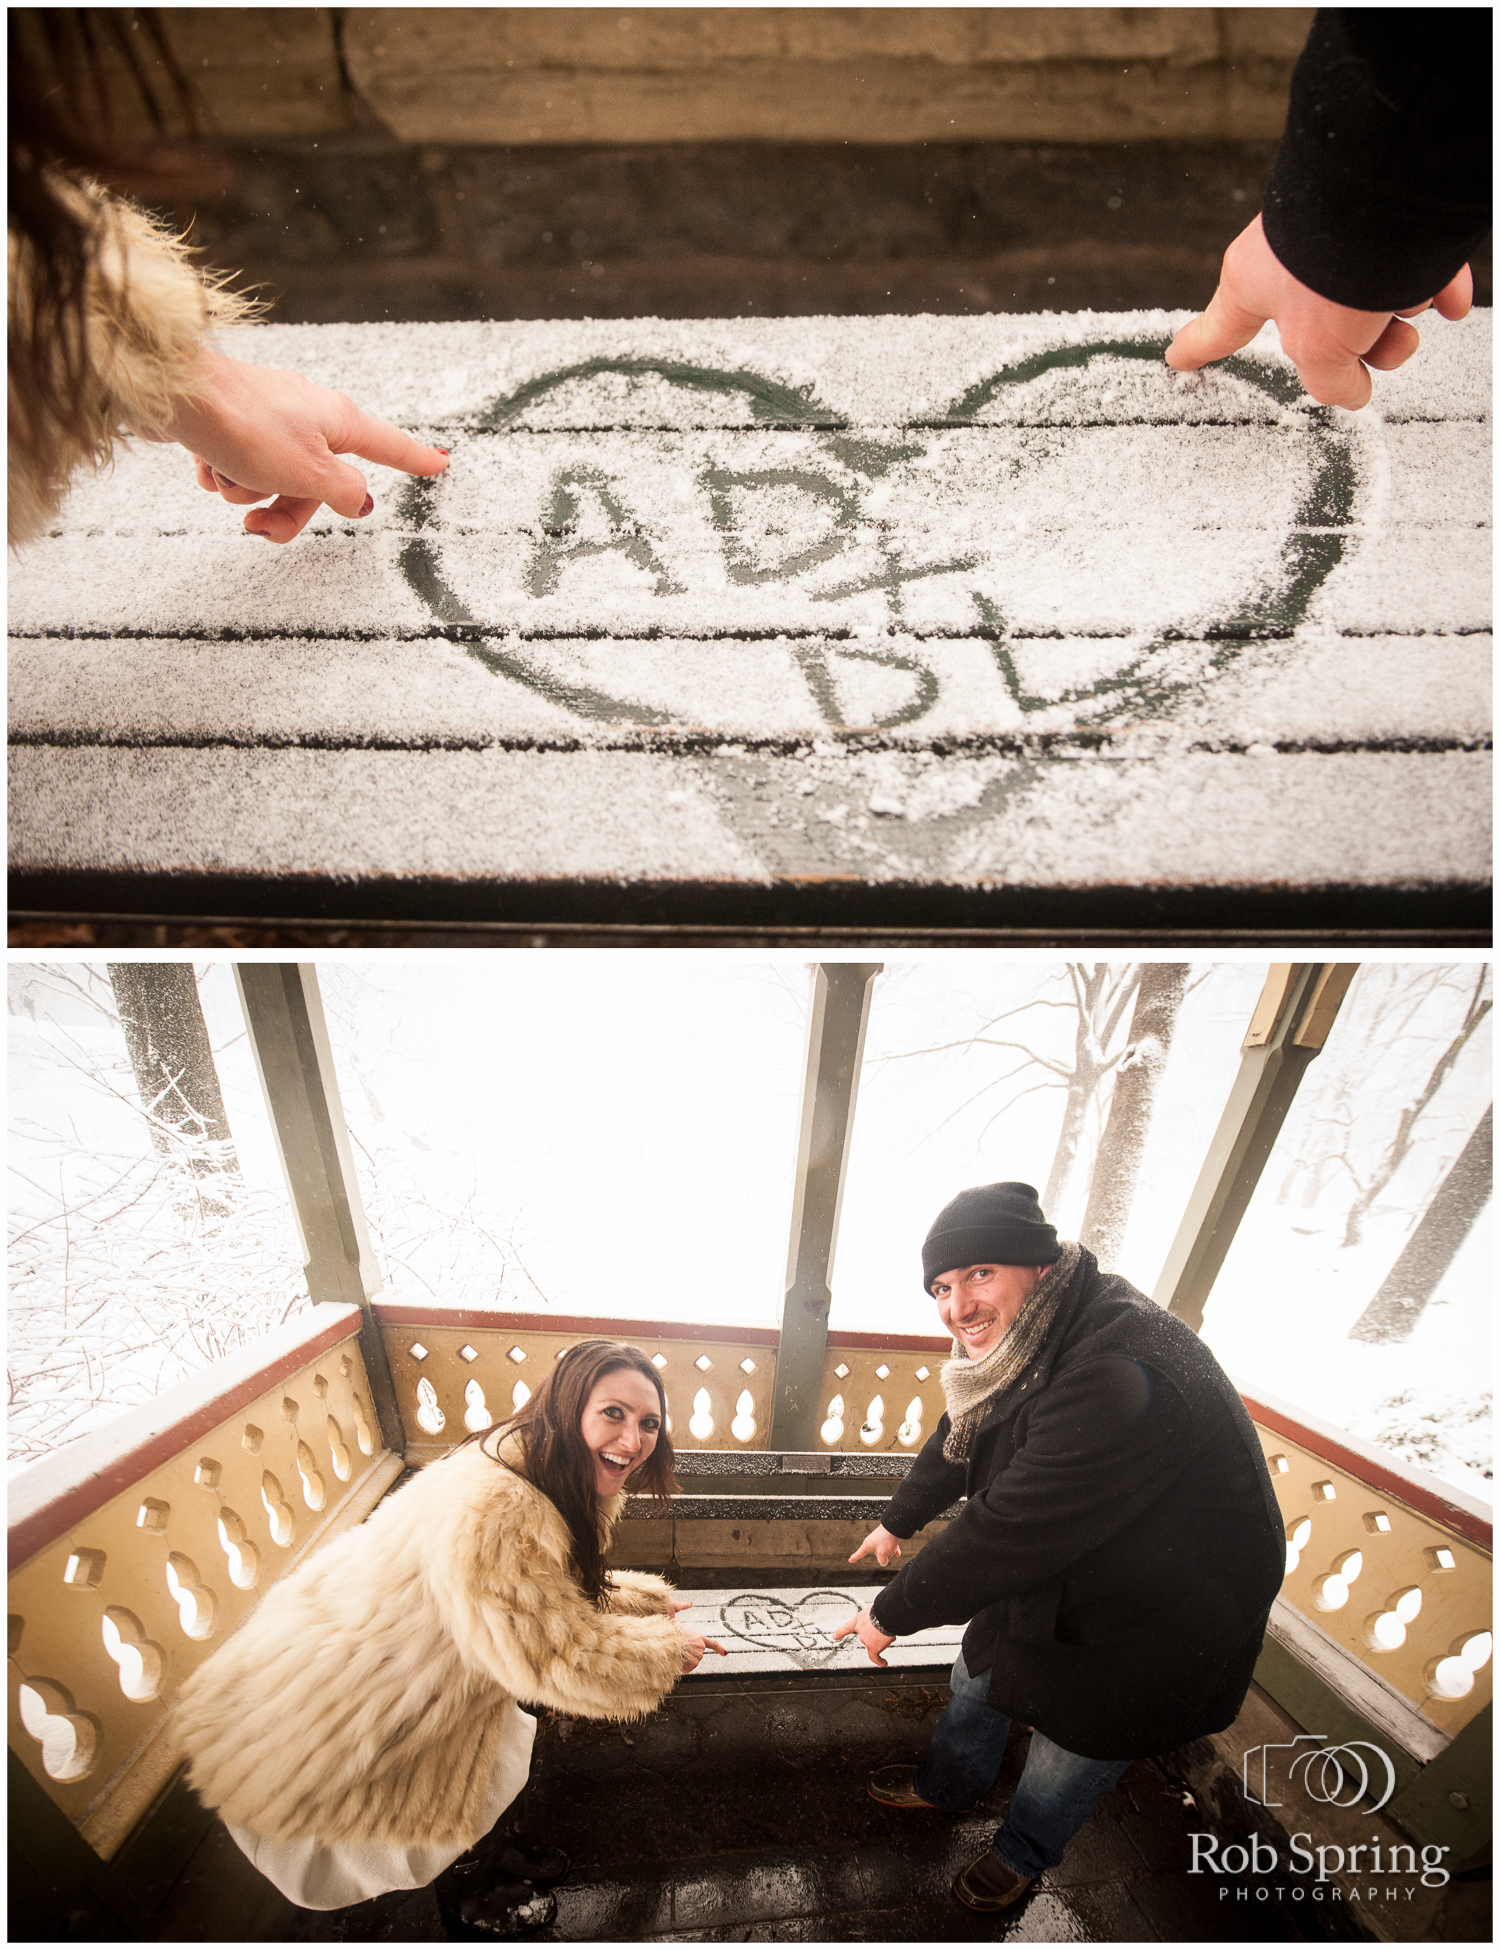 Couple writing initials in the snow